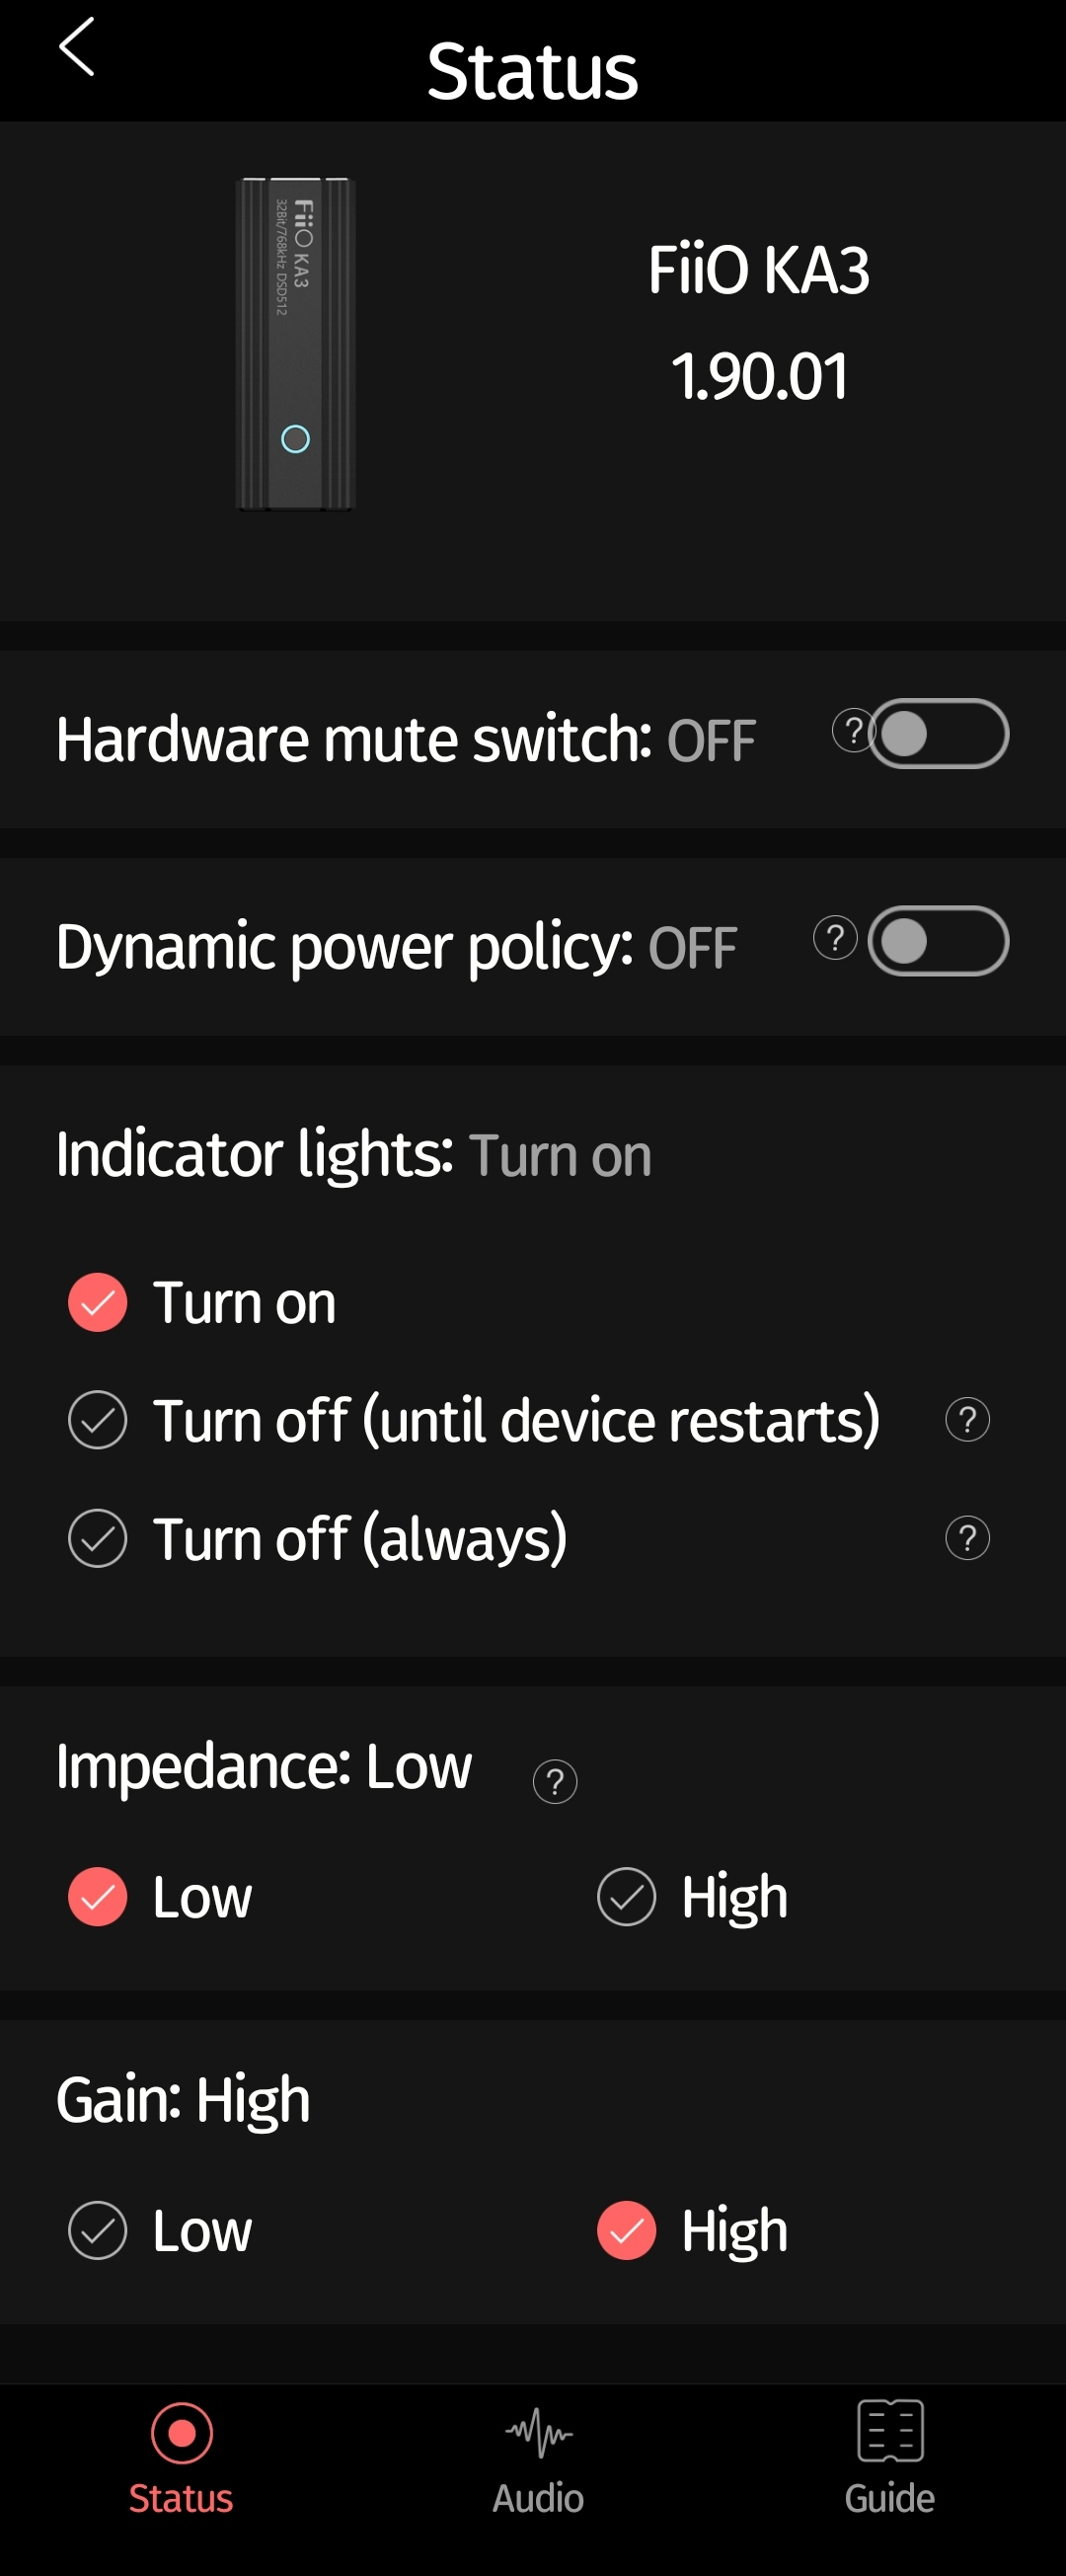 8. How to control the KA3 via the FiiO Control APP in Android